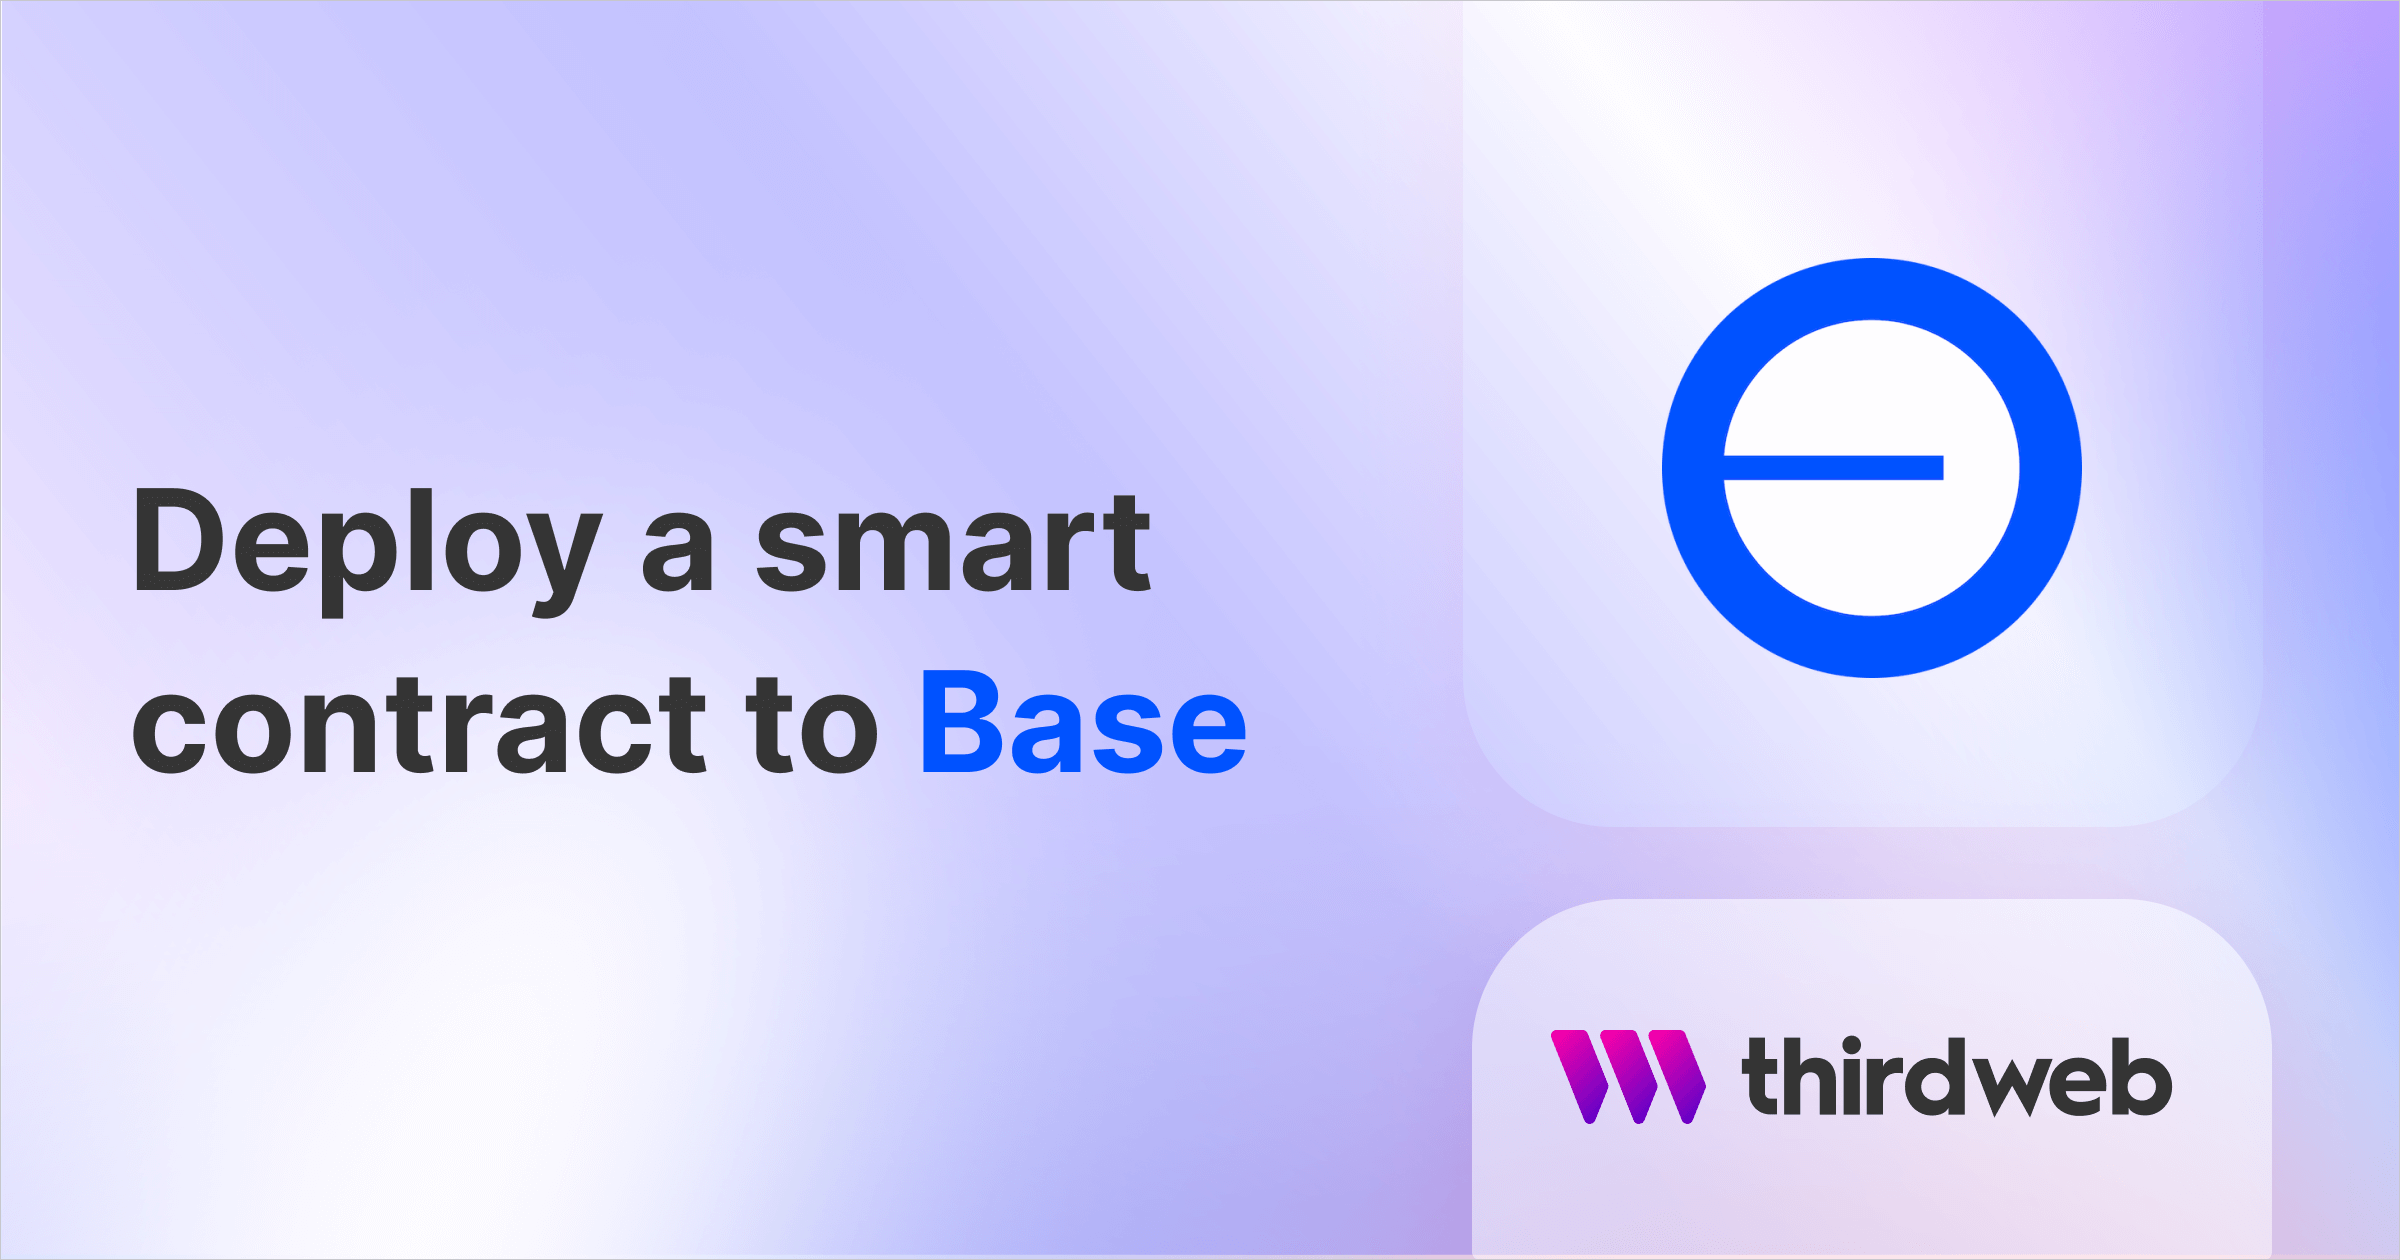 Deploy a smart contract on Base